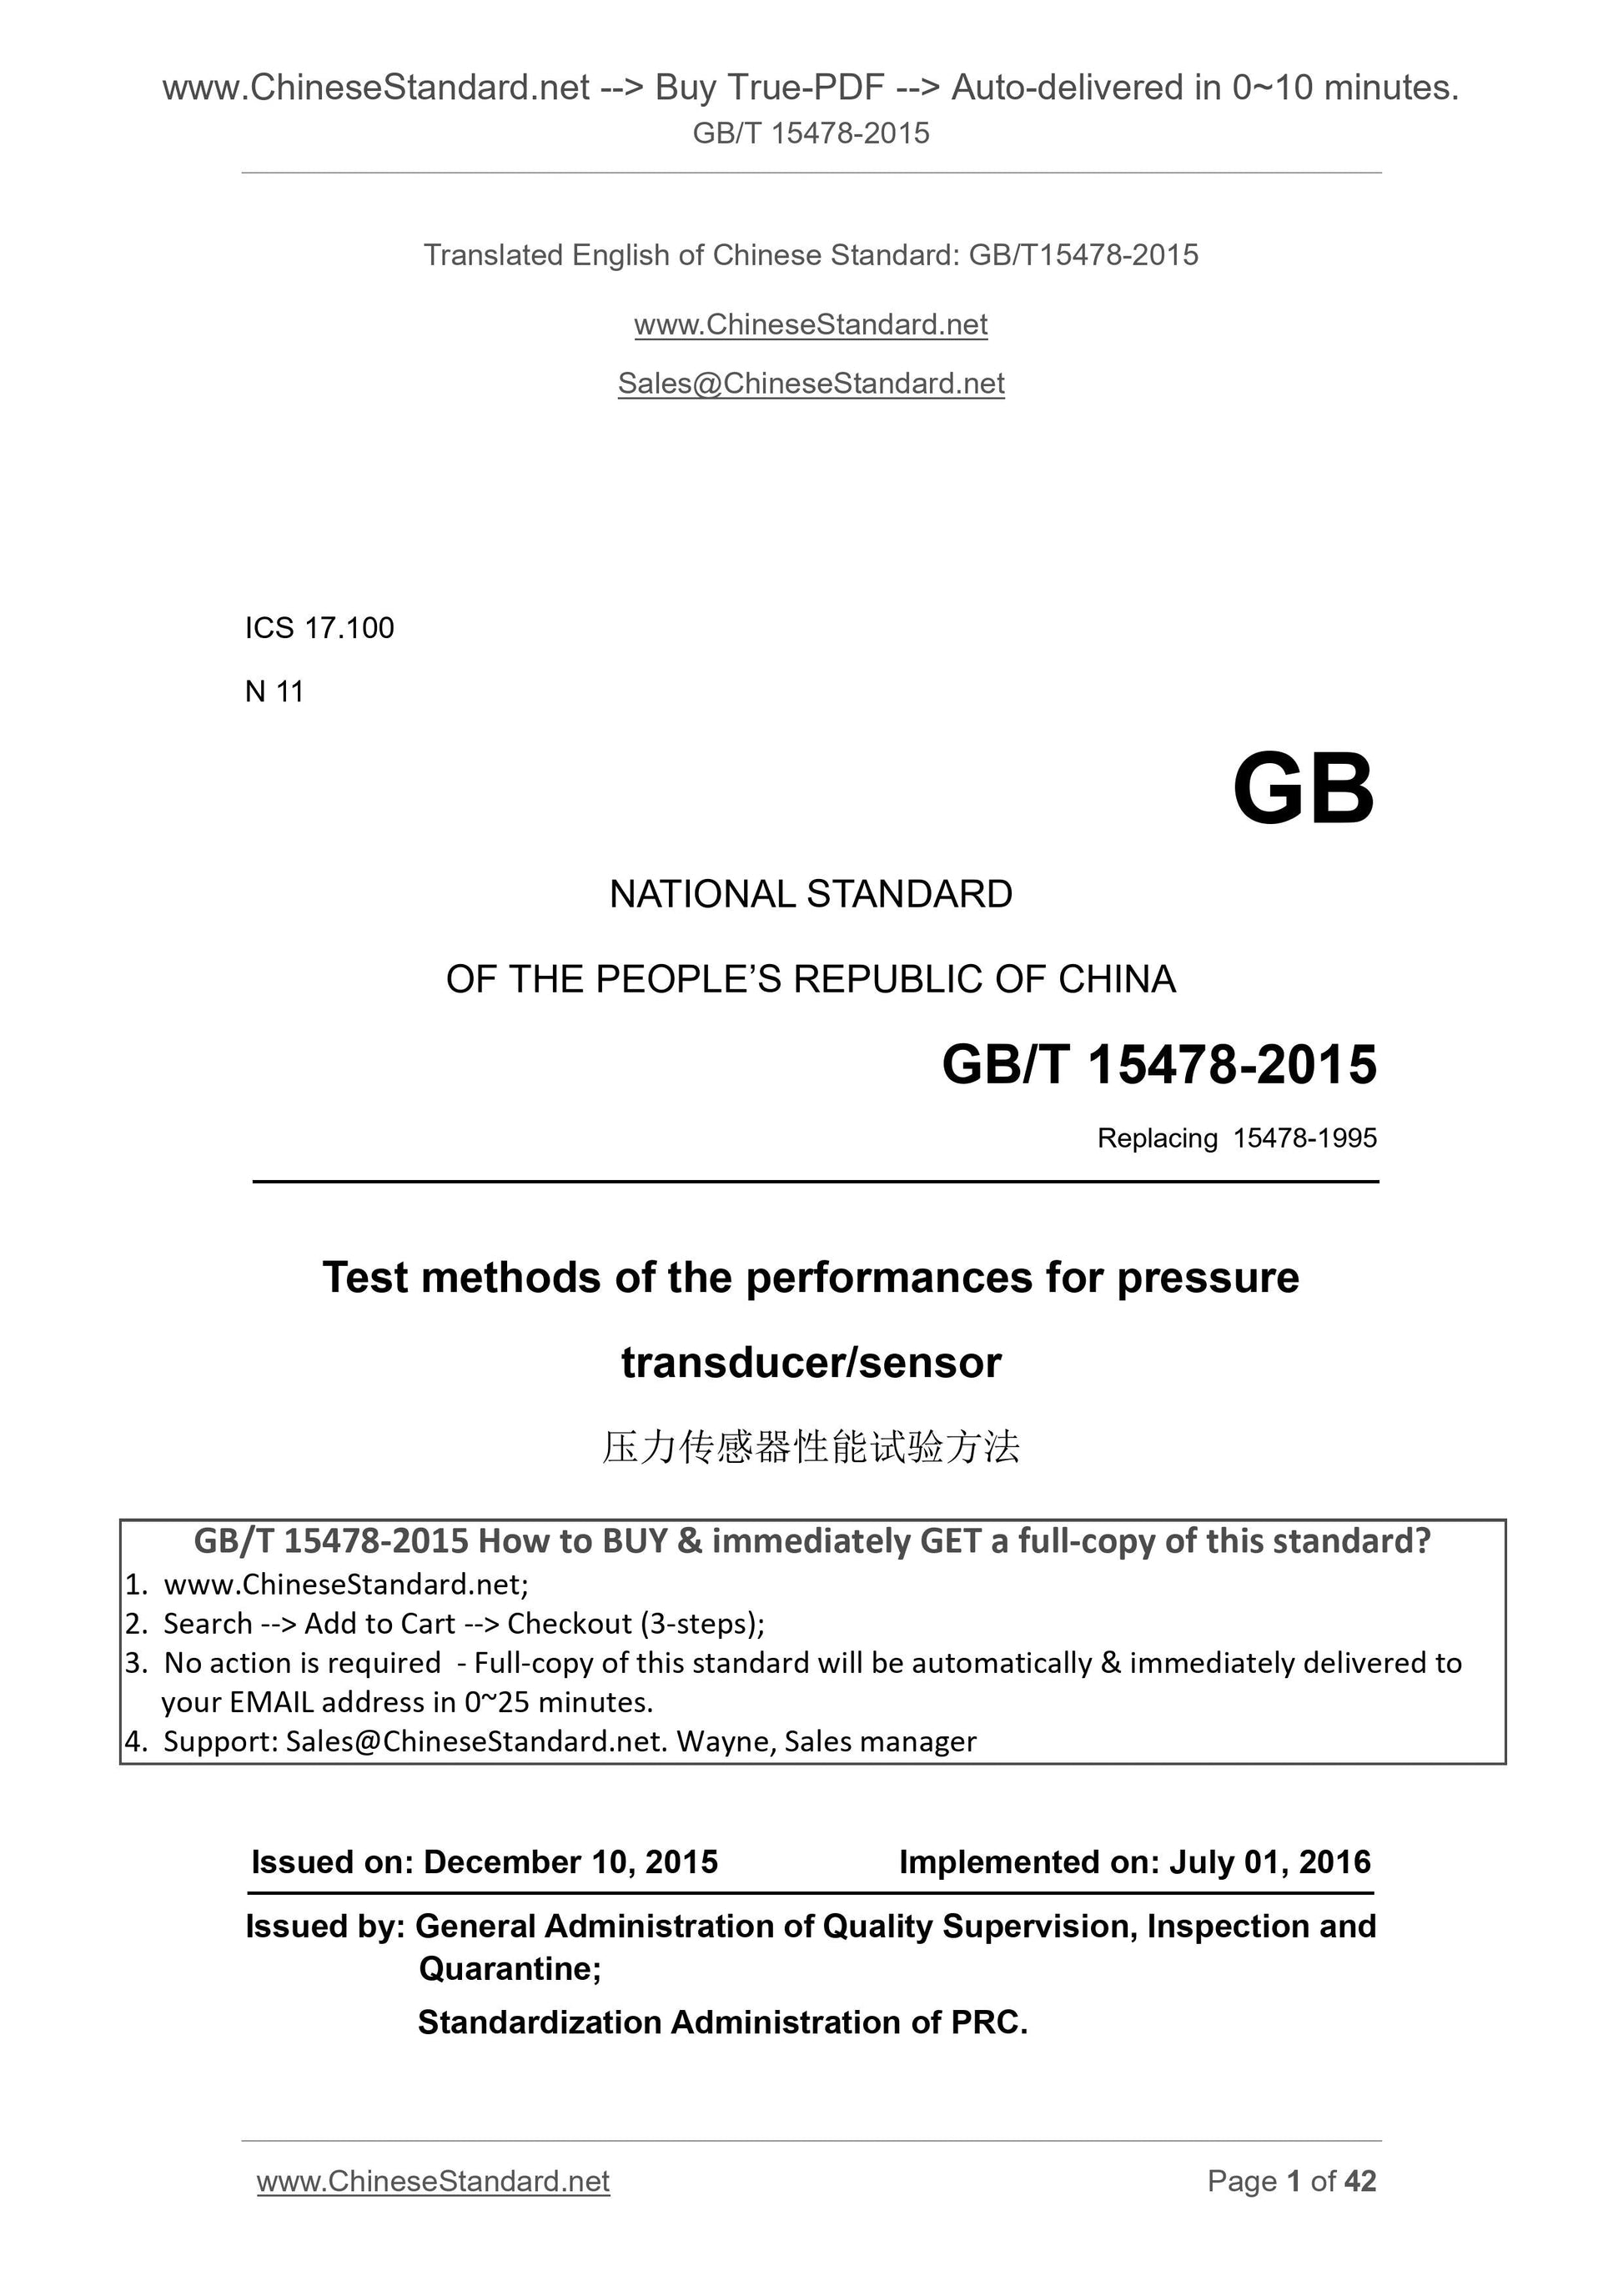 GB/T 15478-2015 Page 1